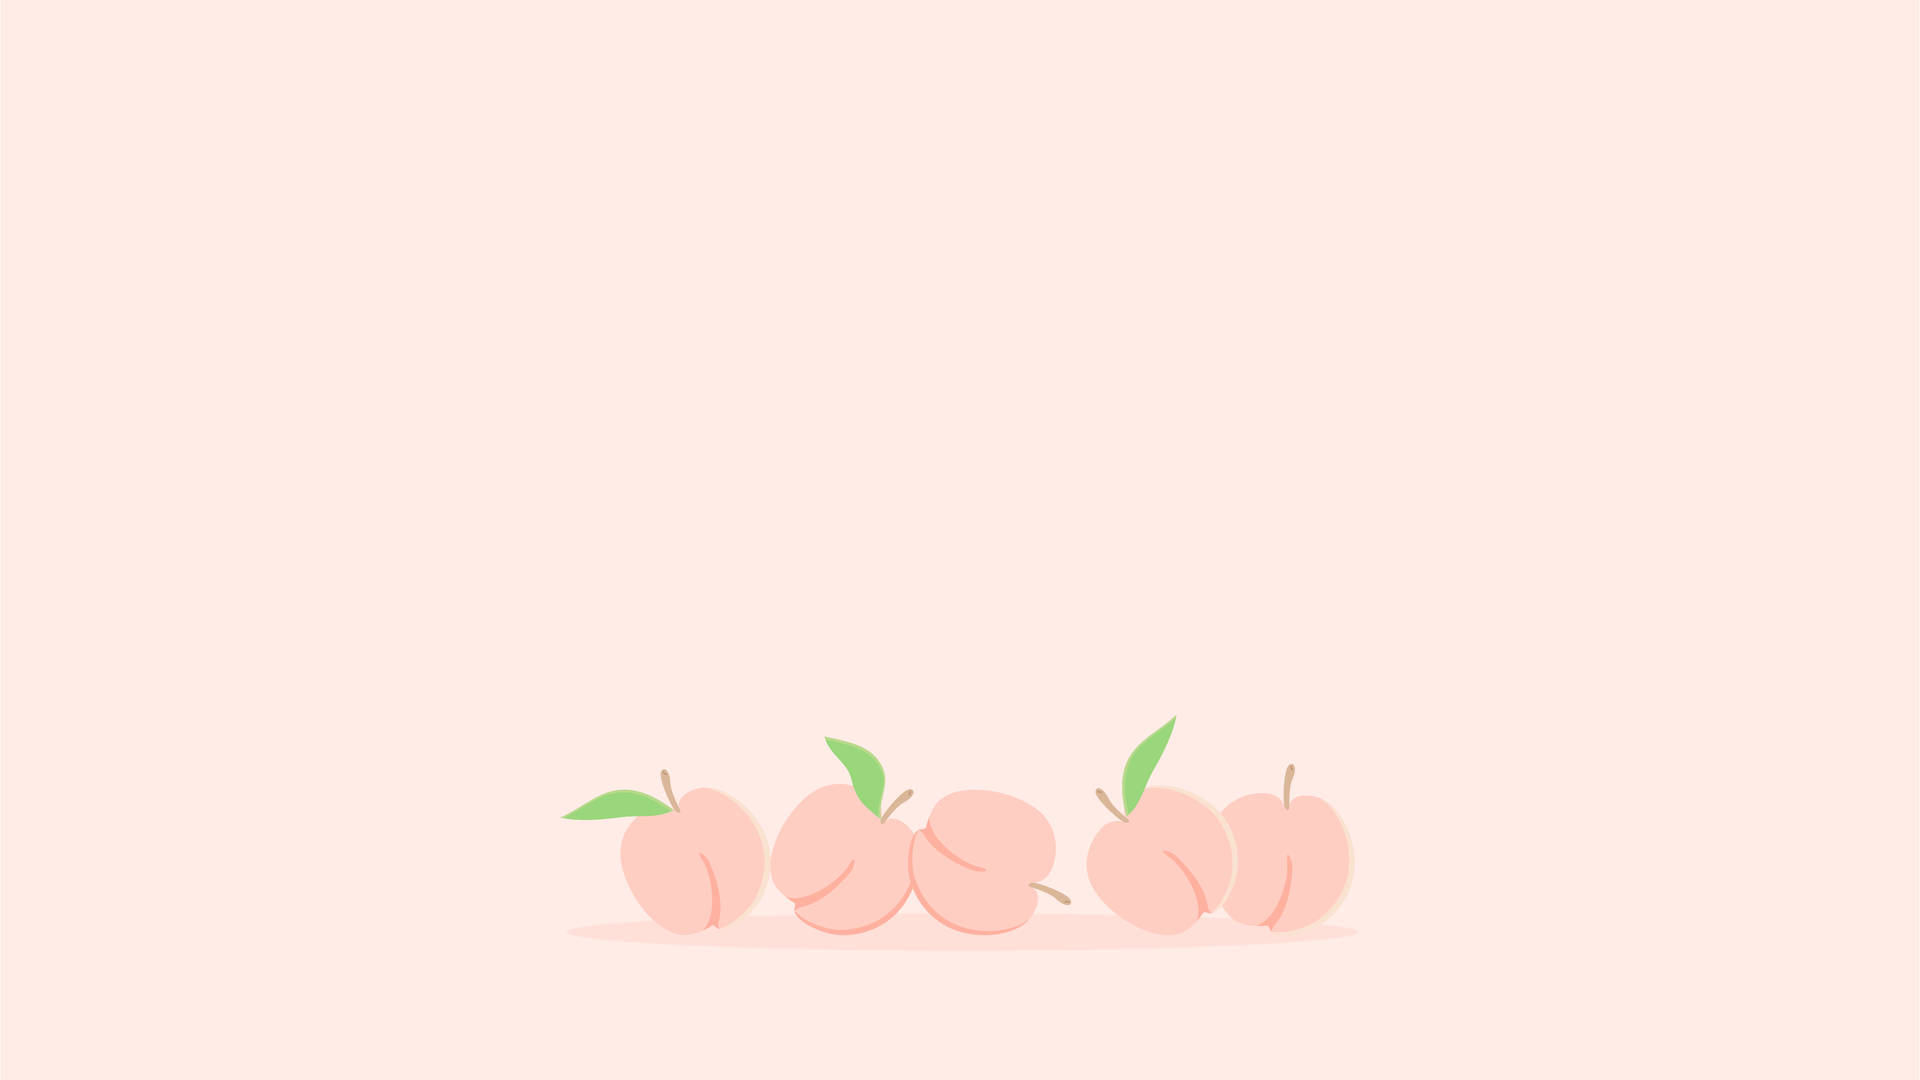 100+] Peach Aesthetic Laptop Wallpapers | Wallpapers.com